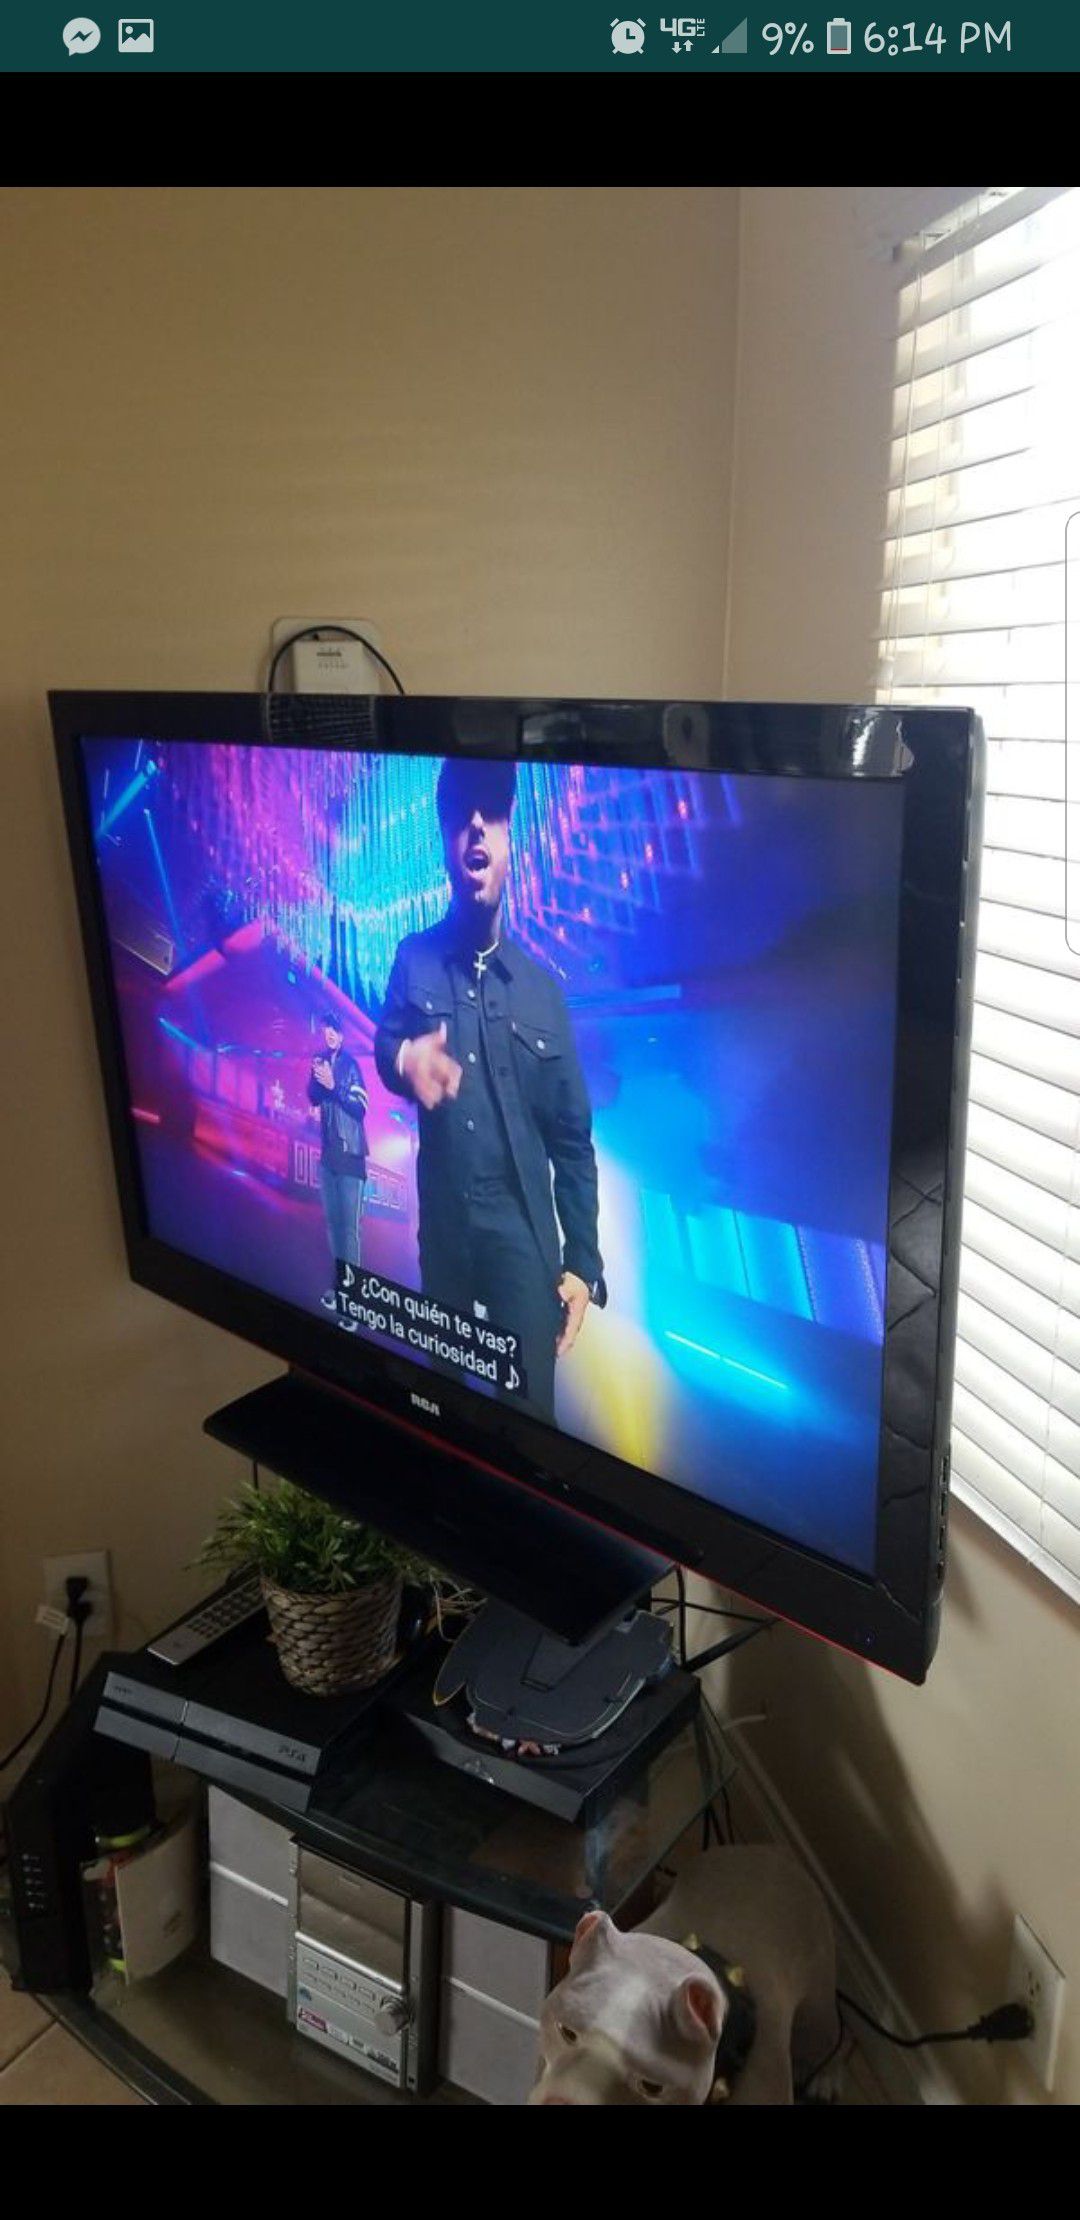 43" RCA TV for sale good conditions